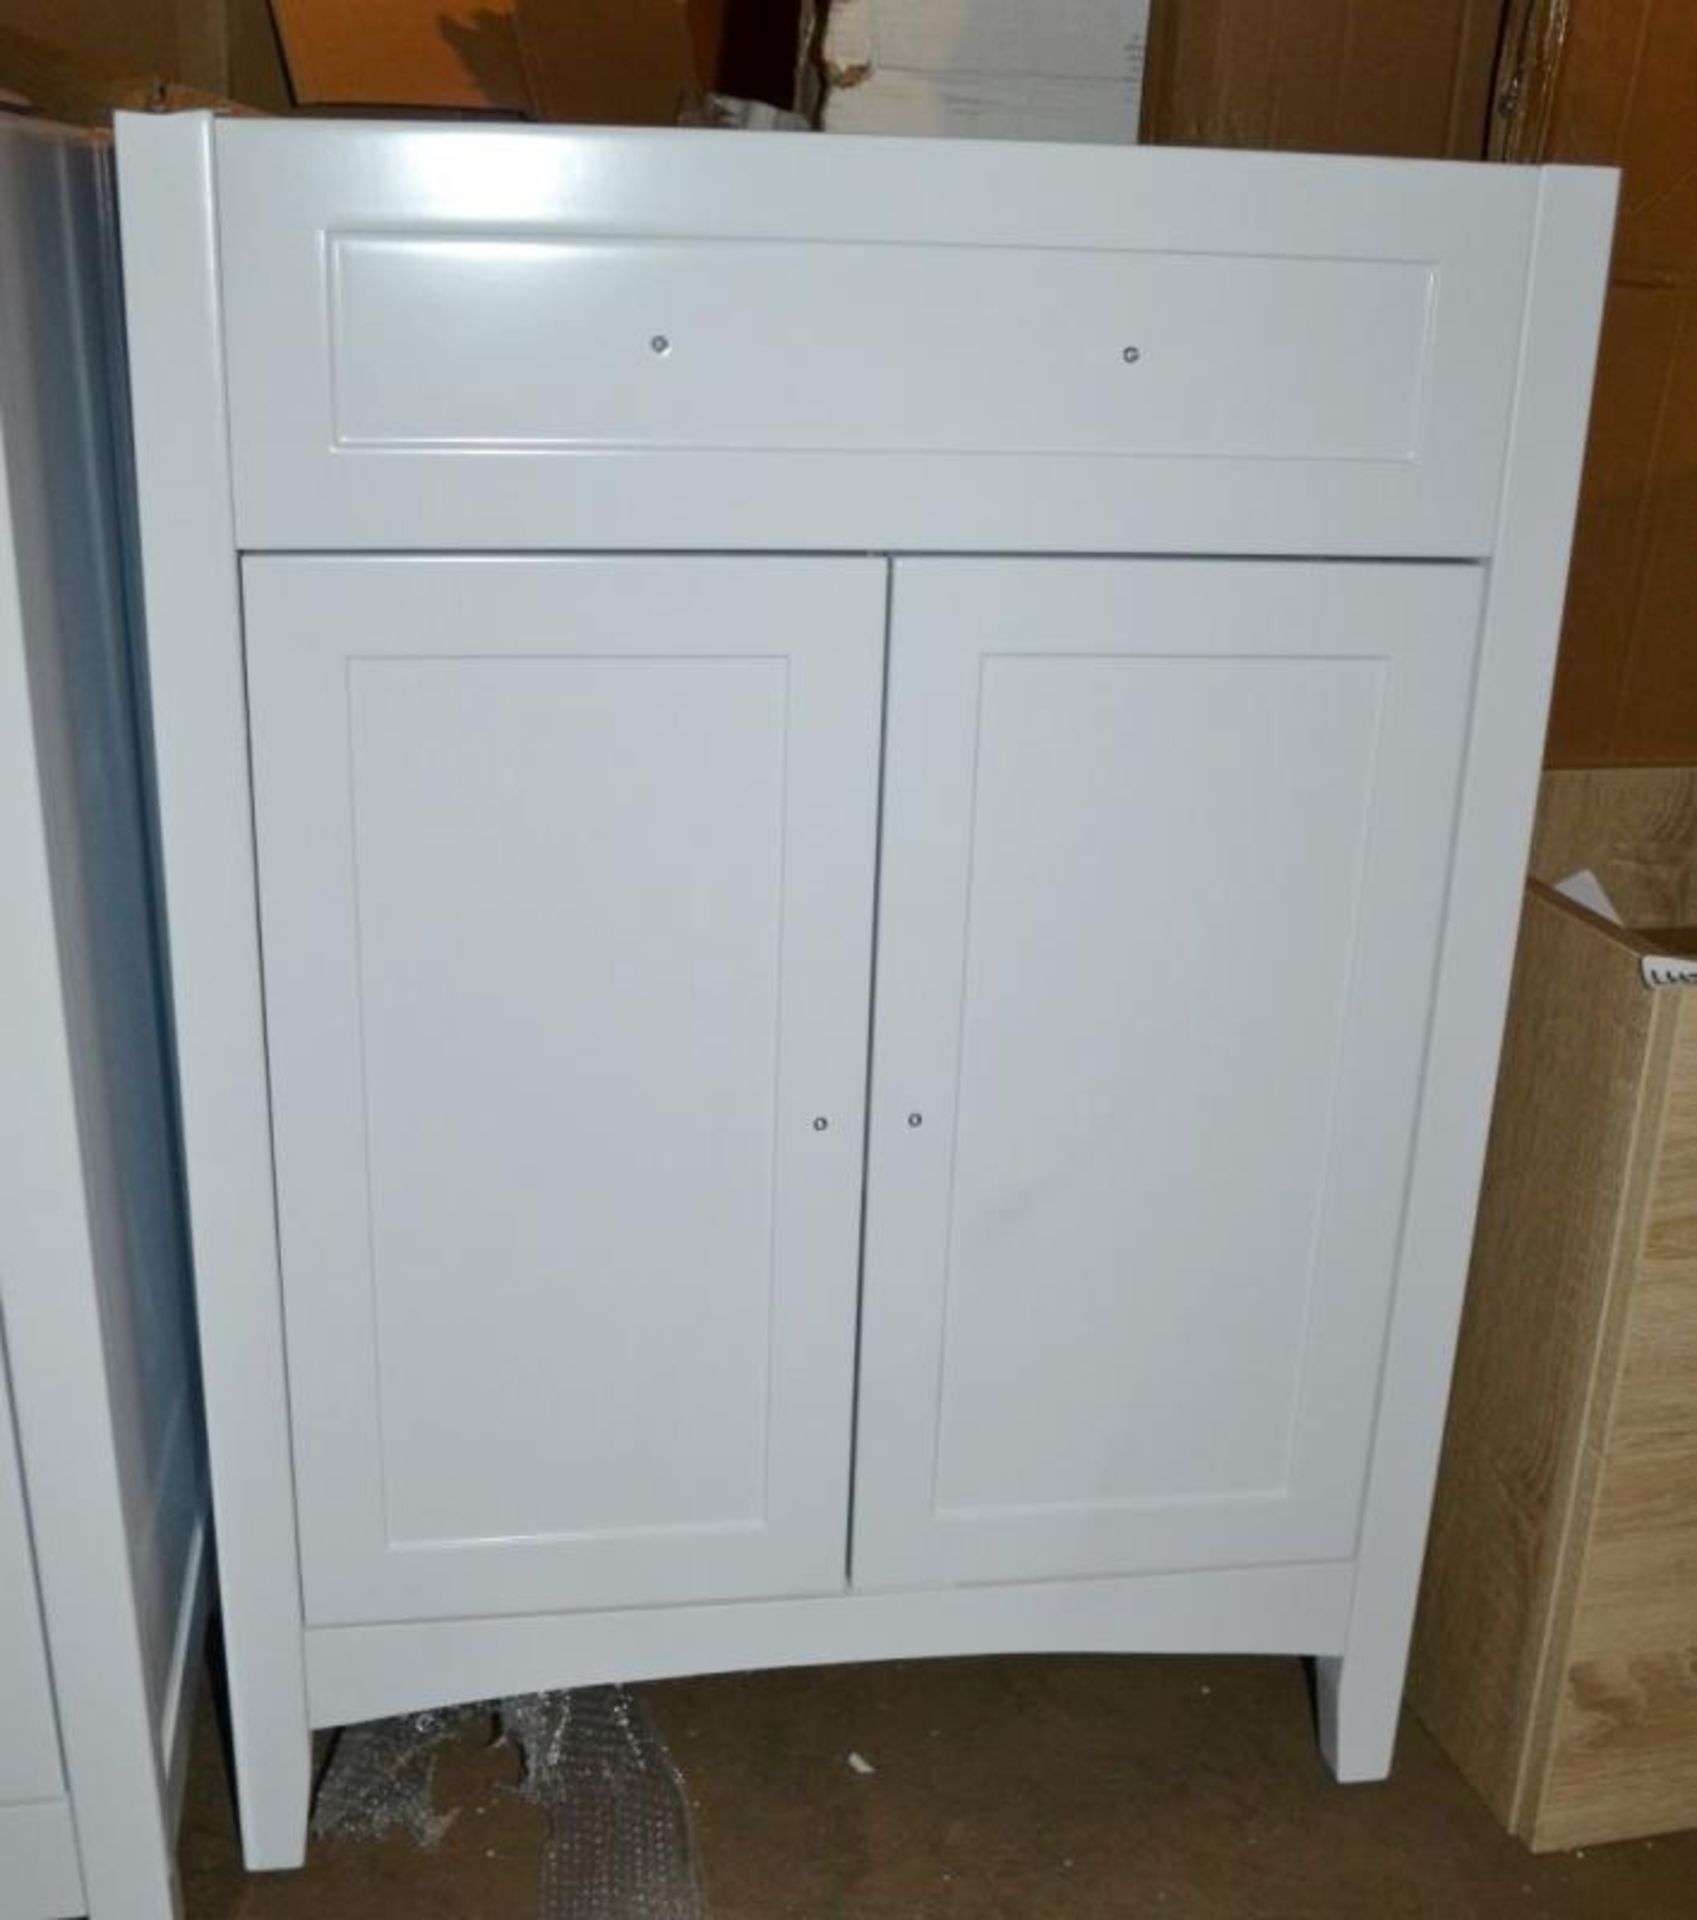 1 x Camberley 600 2-Drawer Soft Close Vanity Unit In White - New / Unused Stock - Dimensions: W60 x - Image 6 of 6